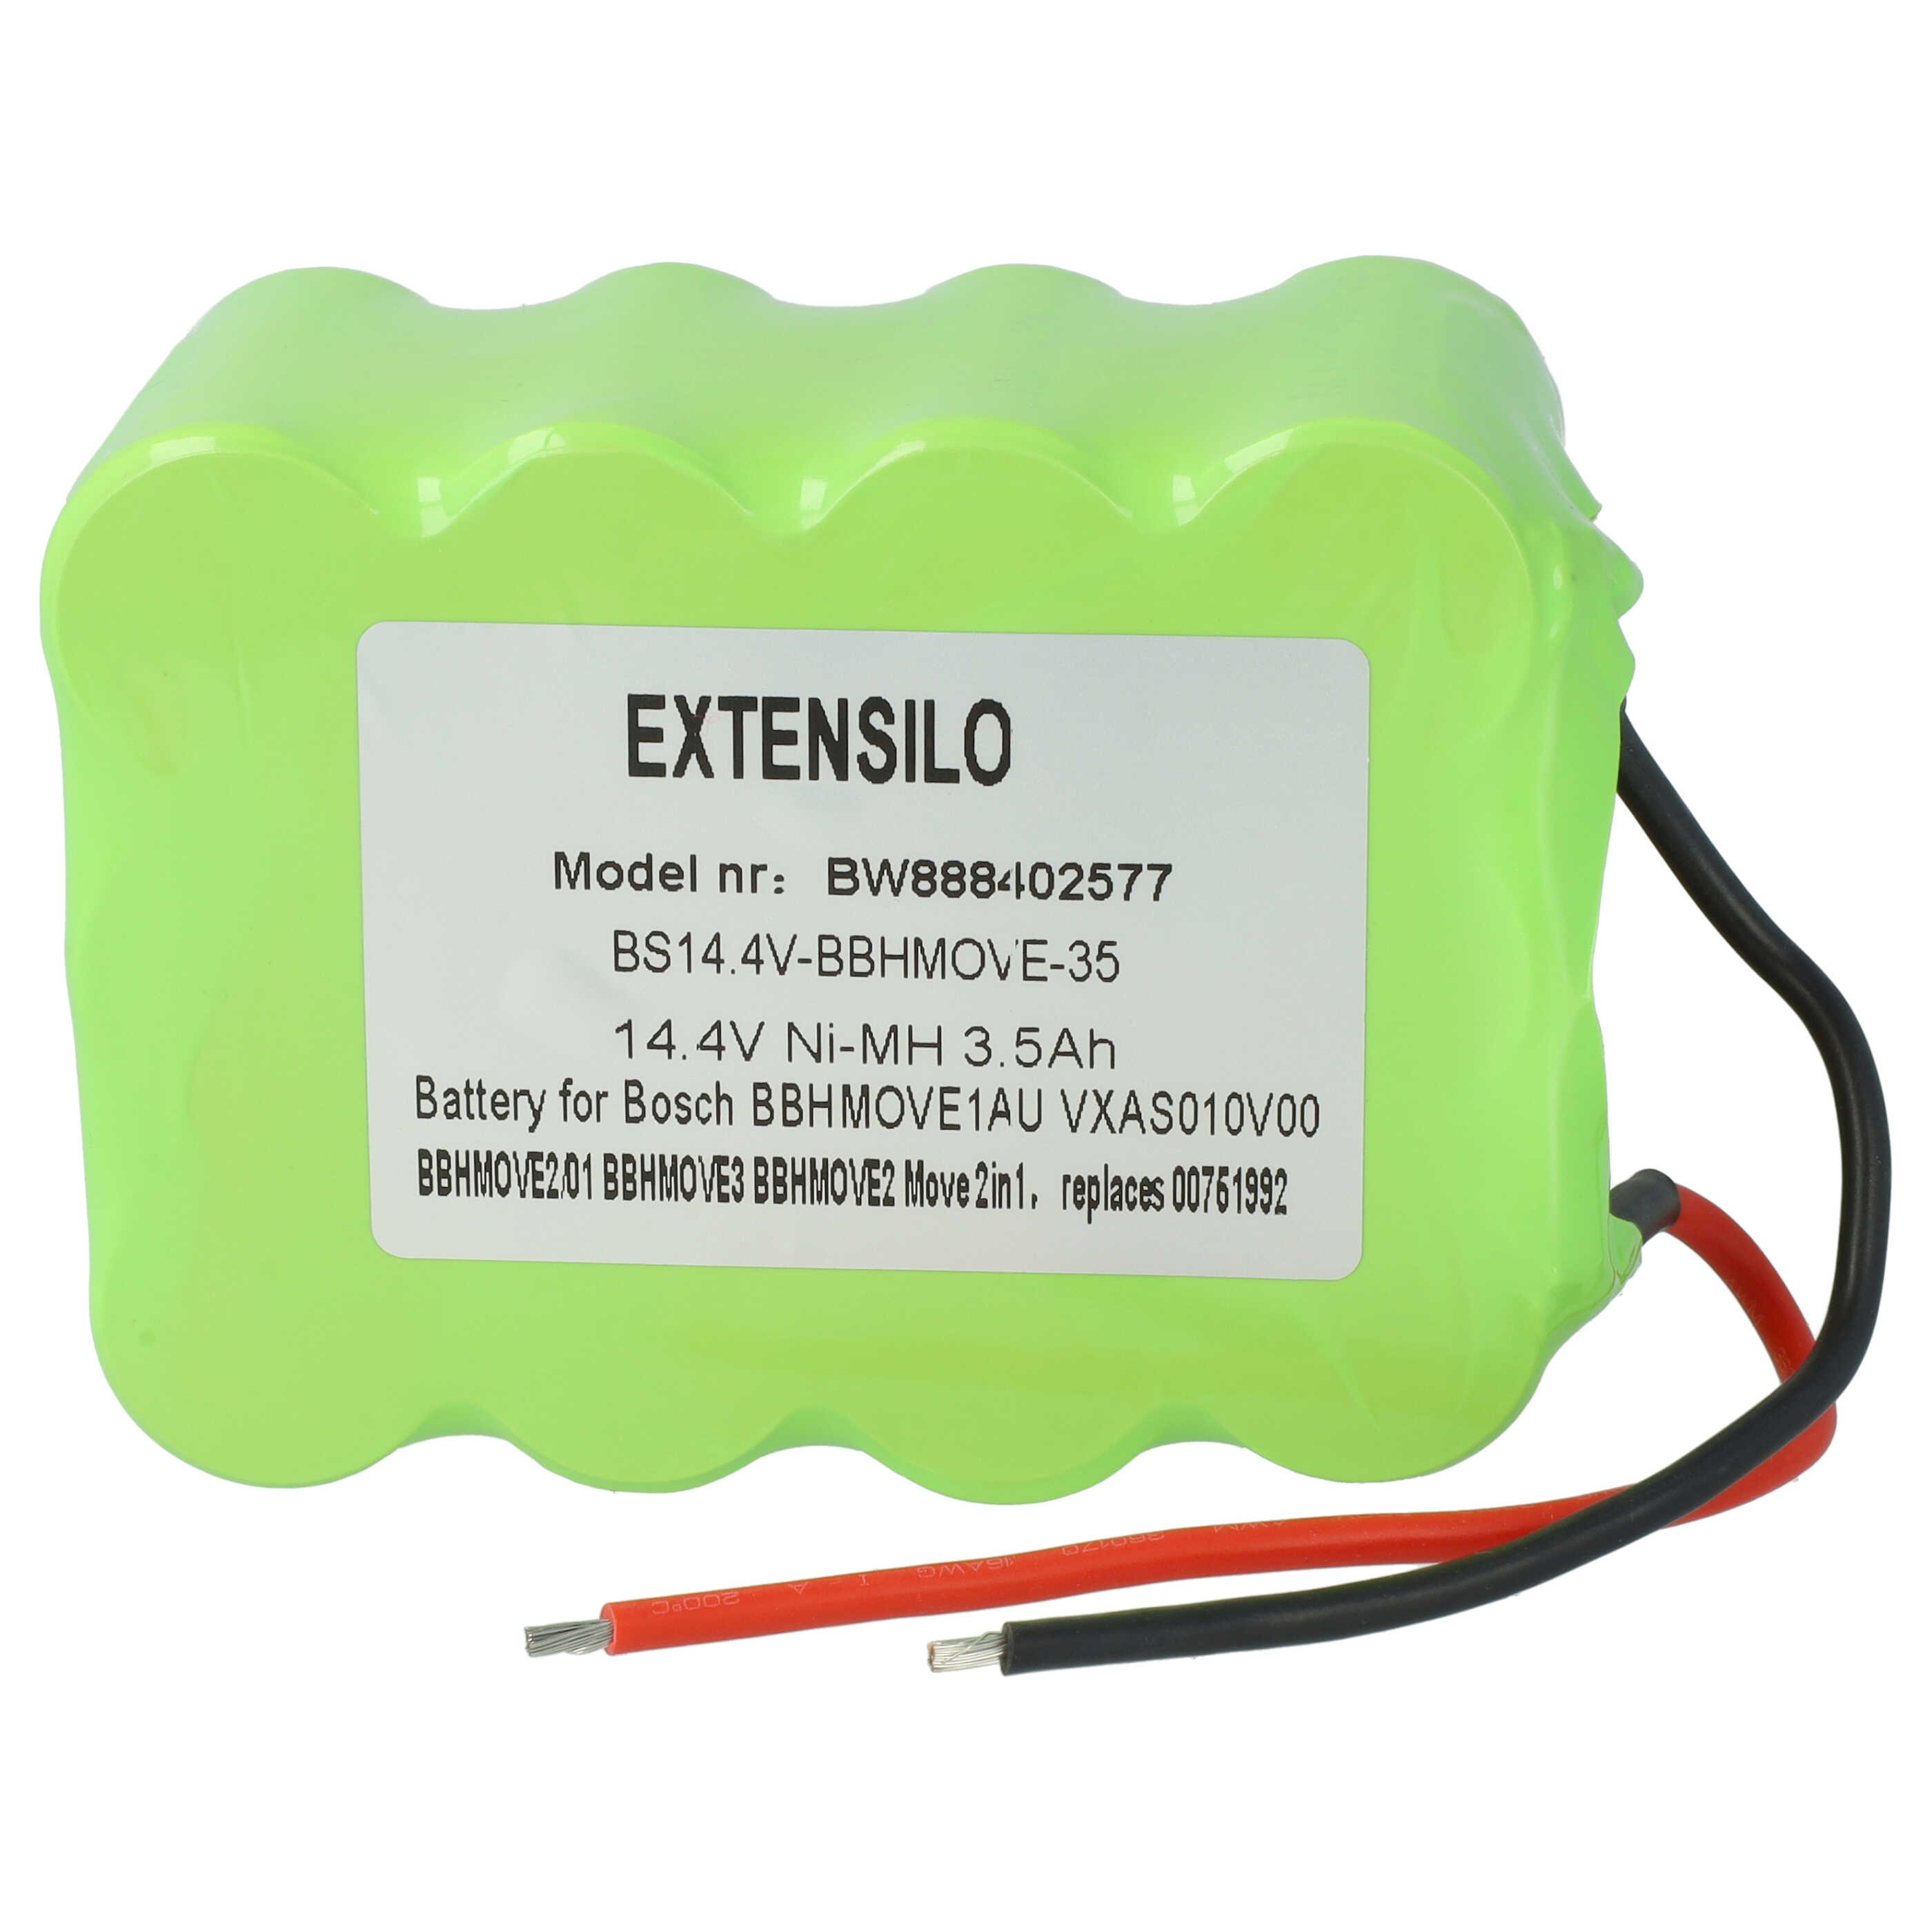 Battery Replacement for Bosch GPRHC18SV007, FD8901, GP180SCHSV12Y2H, 00751992 for - 3500mAh, 14.4V, NiMH